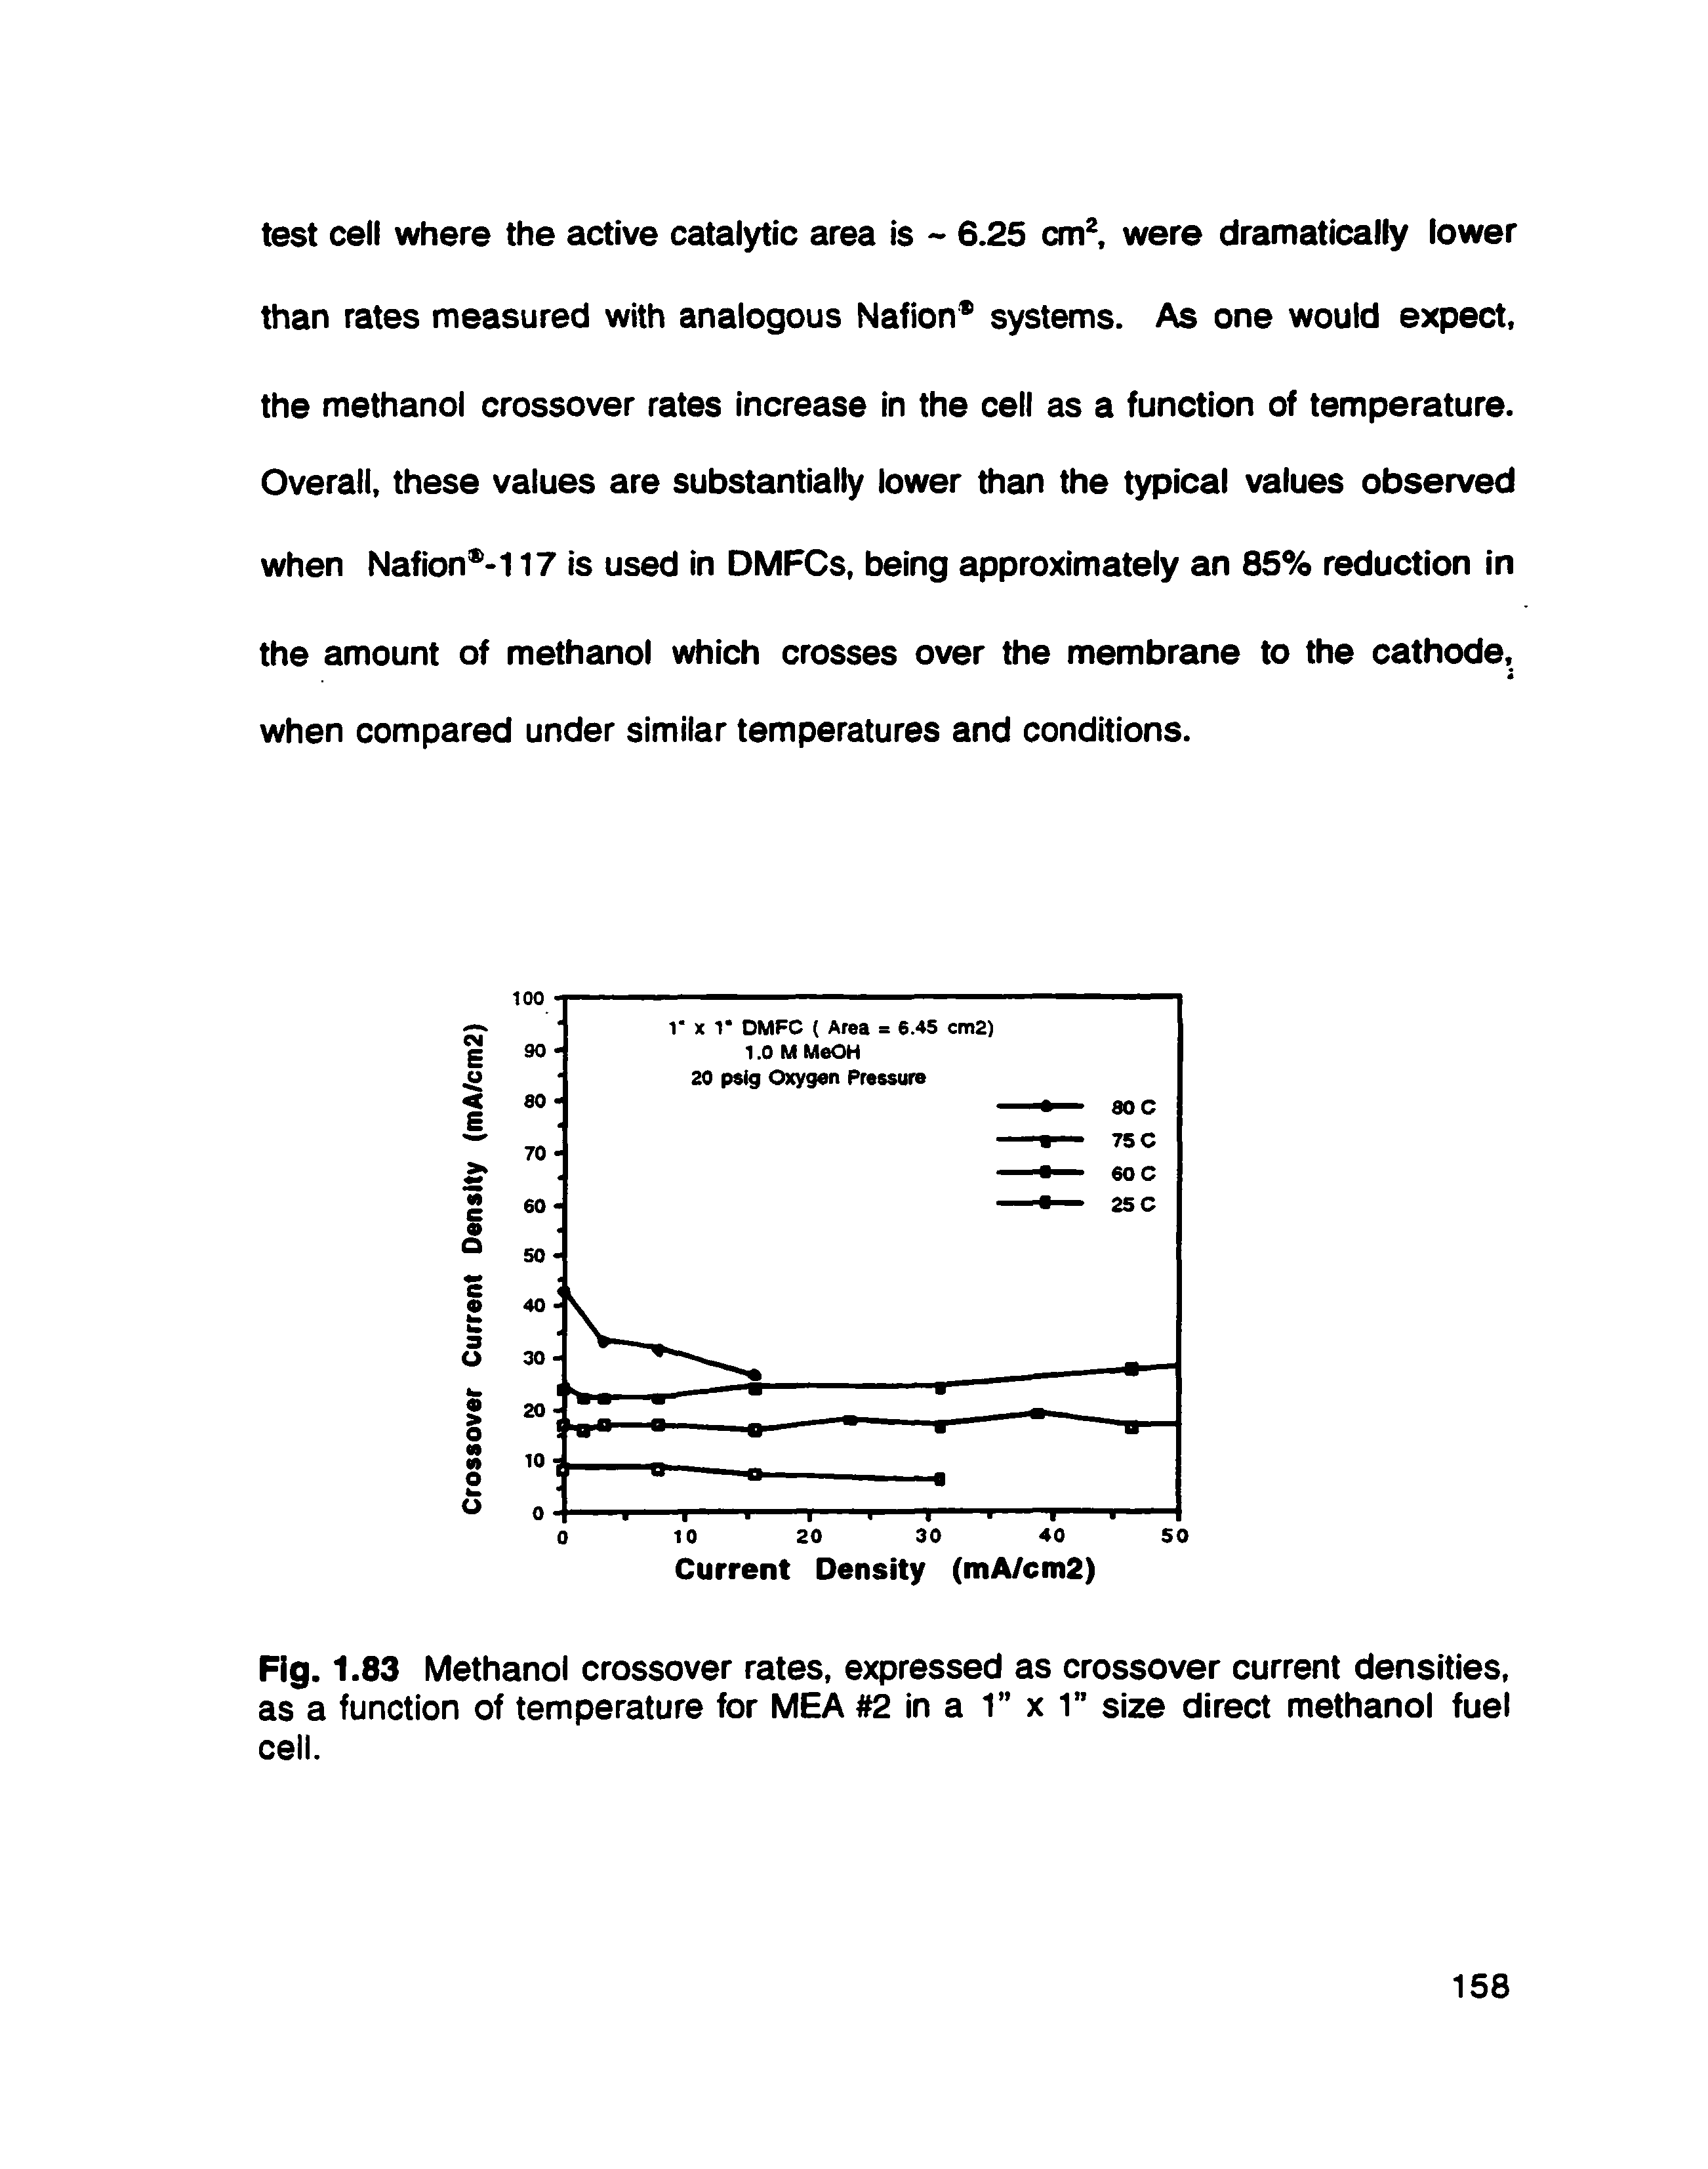 Fig. 1.83 Methanol crossover rates, expressed as crossover current densities, as a function of temperature for MEA 2 in a 1 x 1 size direct methanol fuel cell.